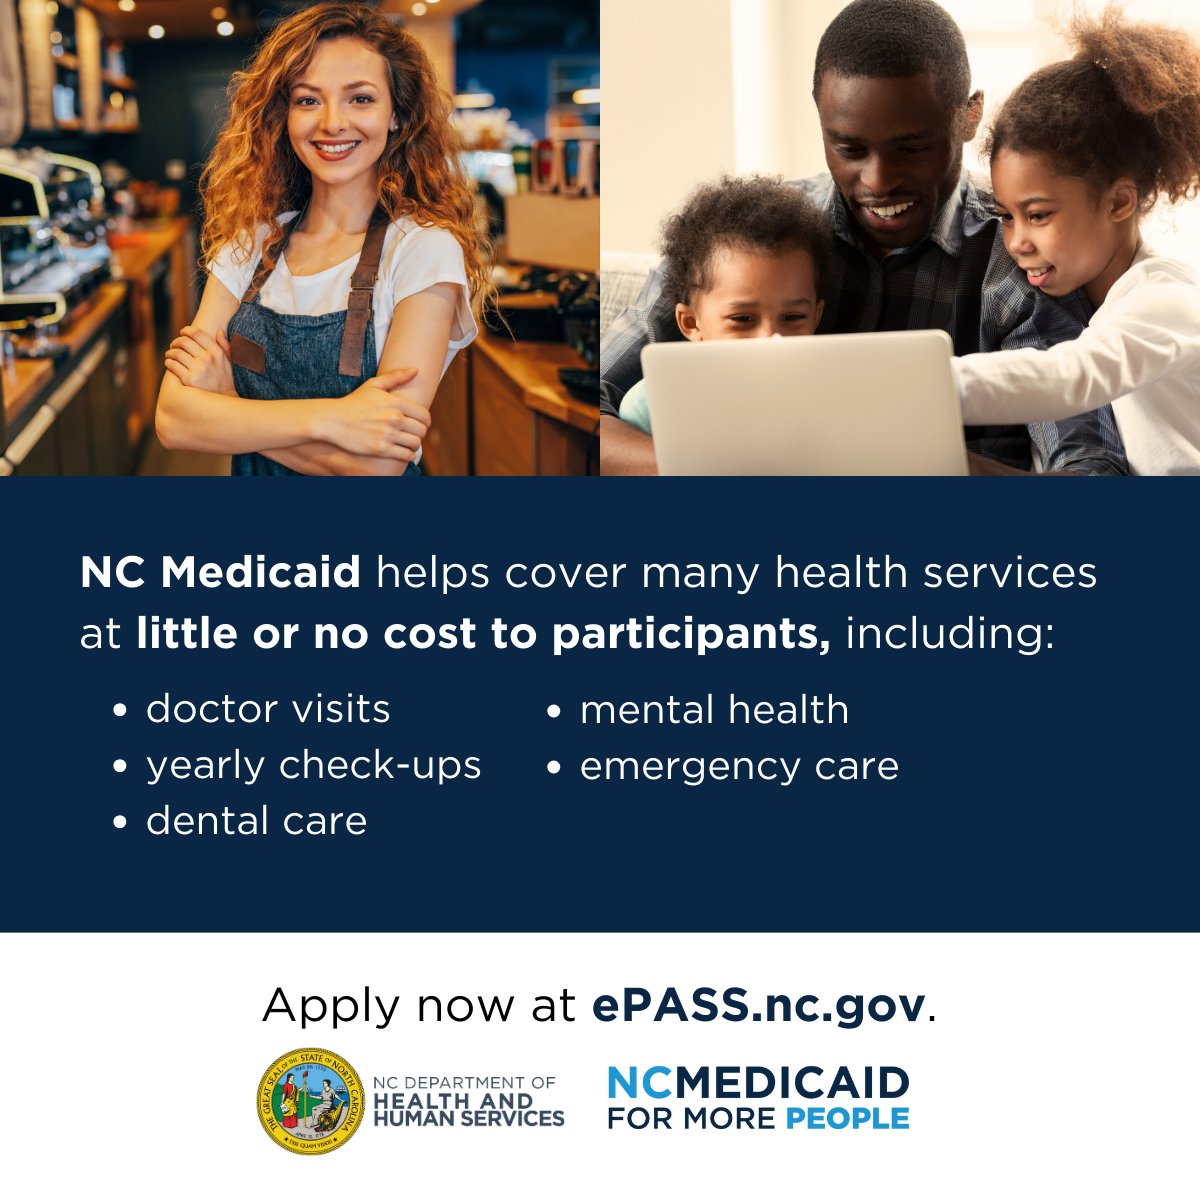 “600,000 North Carolinians can now access the care they need to stay healthier, treat sickness earlier and have the peace of mind of knowing that health care is within their reach,” said Governor Roy Cooper. 

Visit ePASS.nc.gov to apply for #NCMedicaid today!